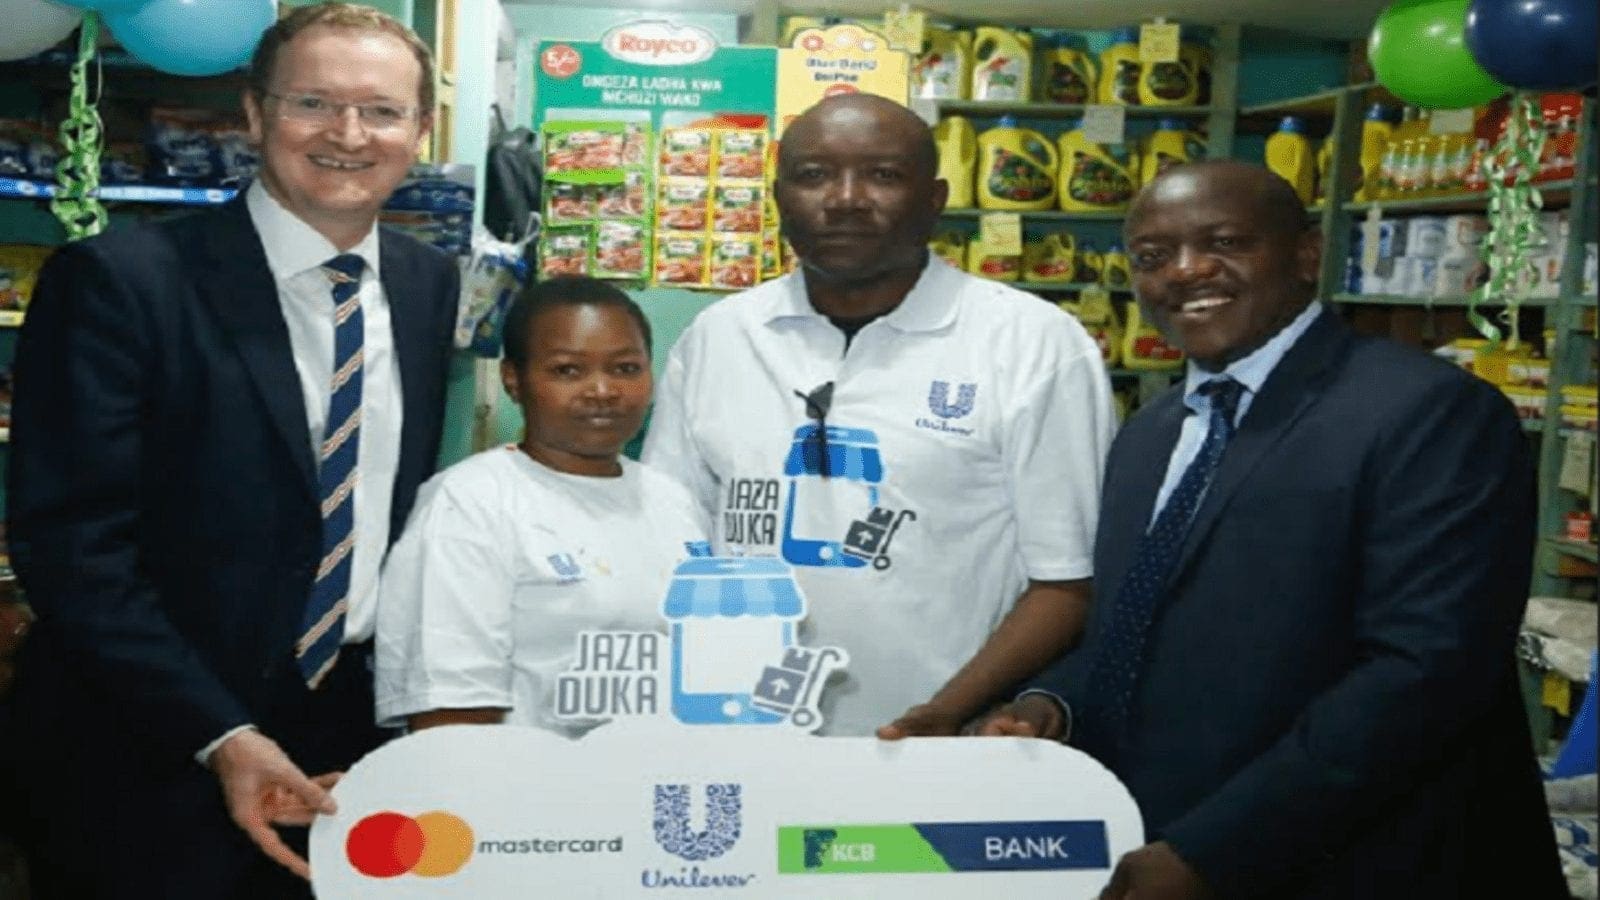 Unilever, KCB and Mastercard partner to drive COVID-19 economic recovery among retailers